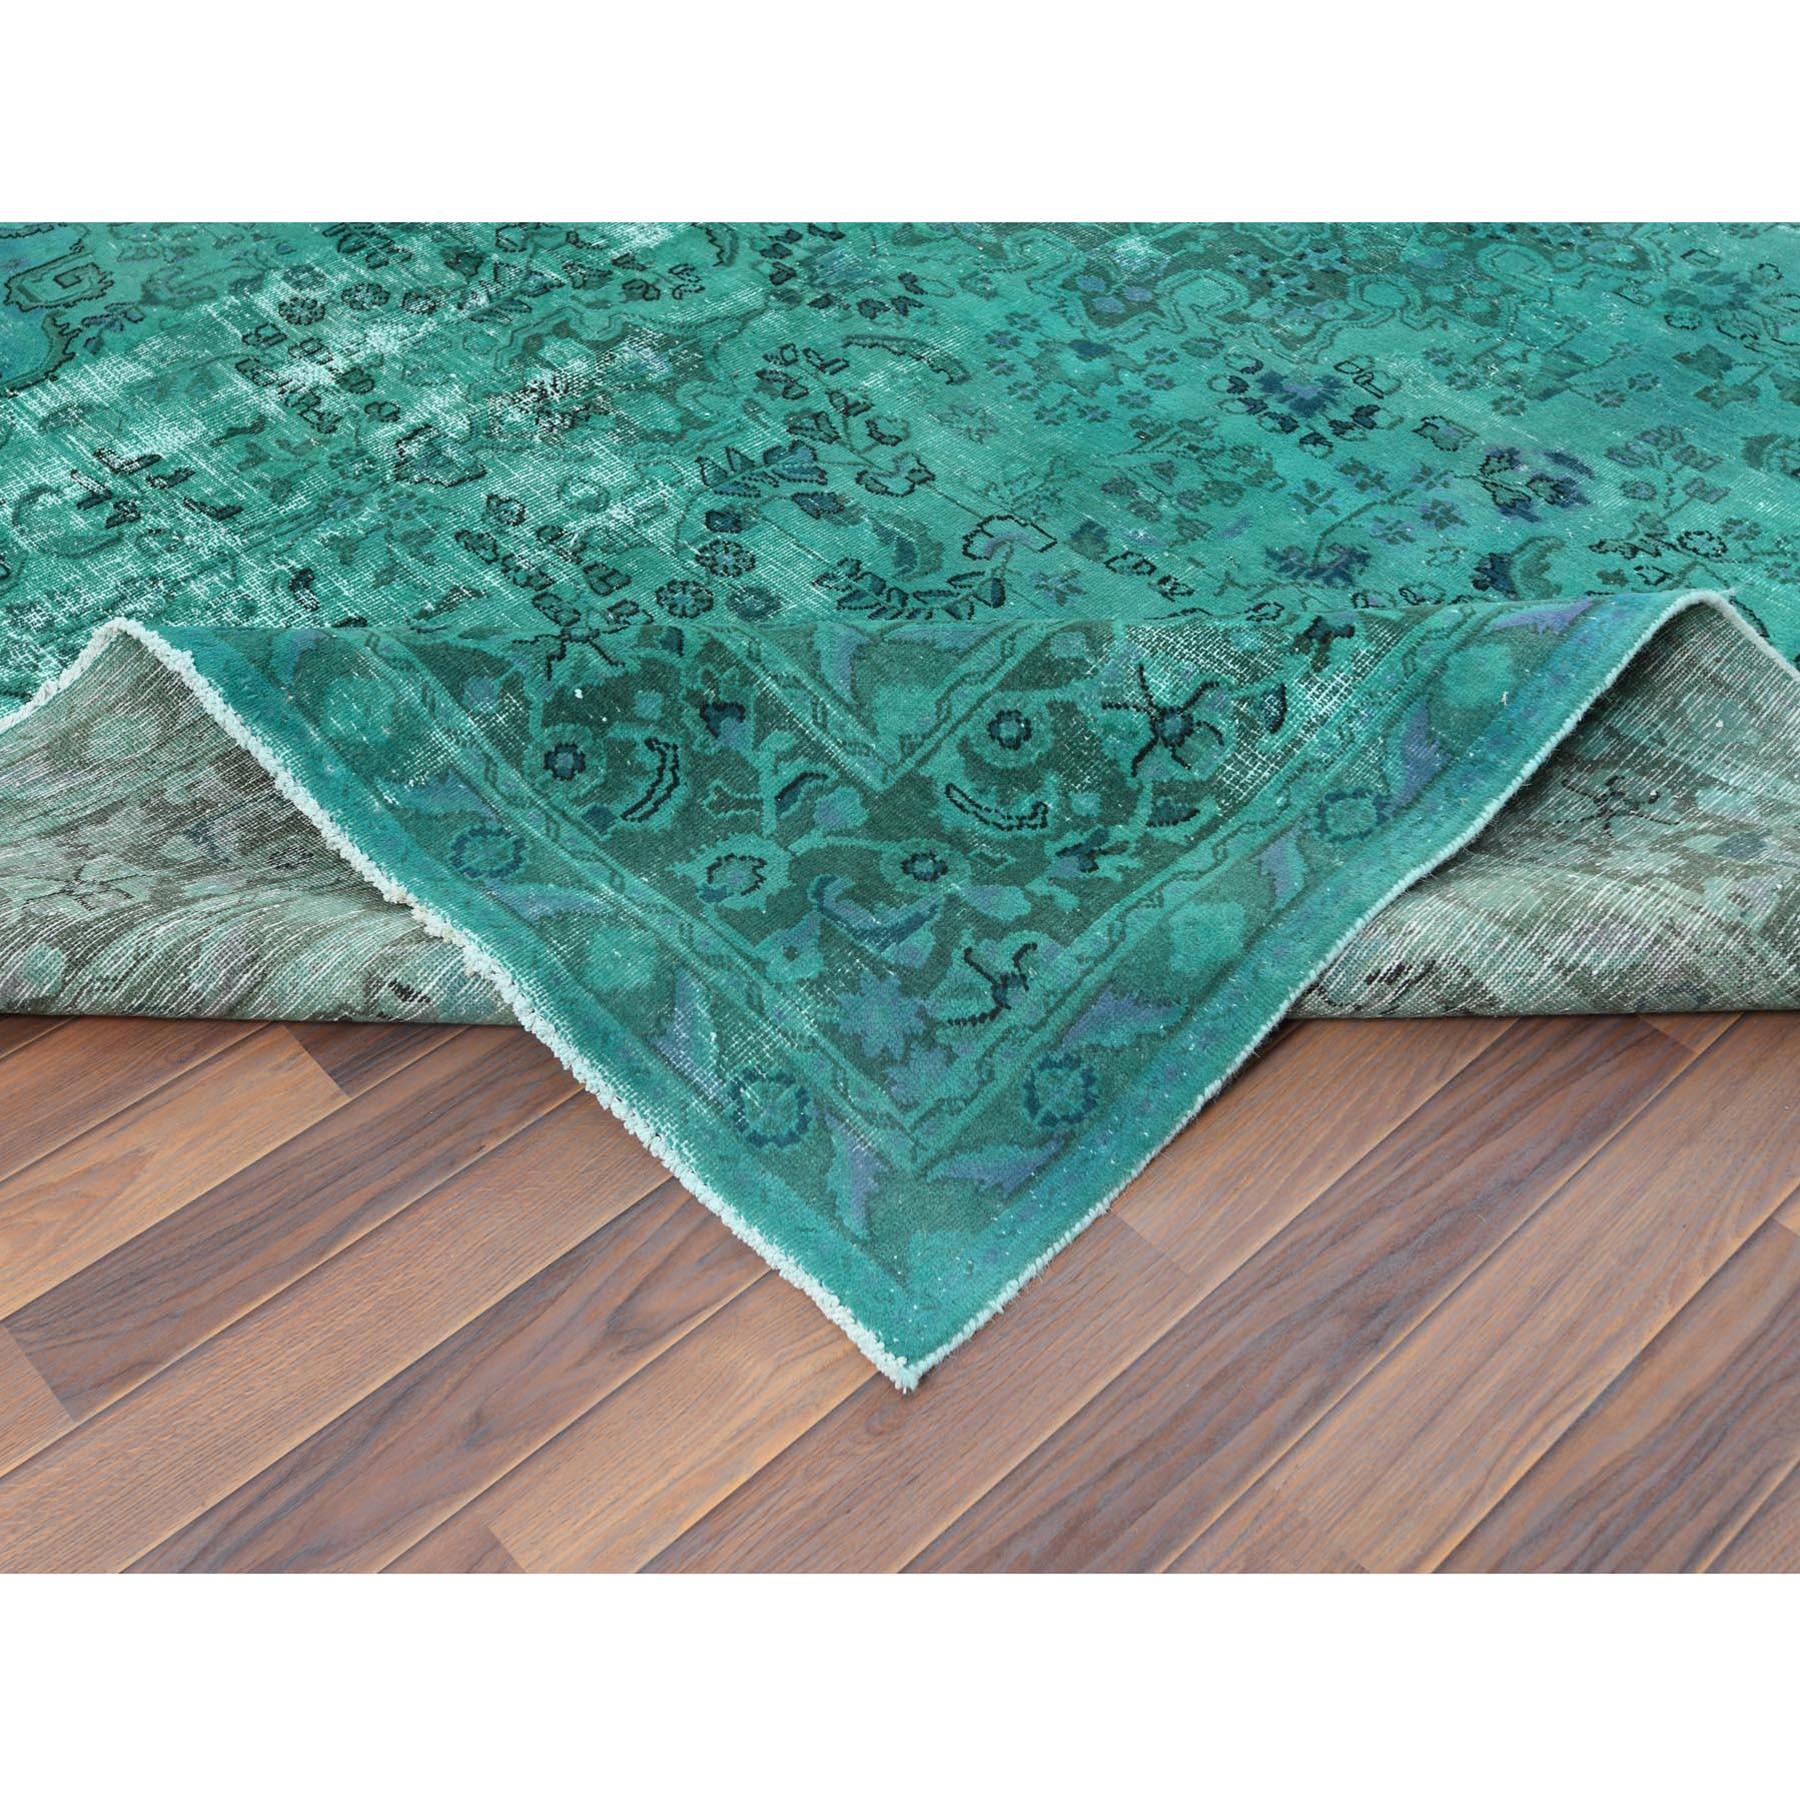 Teal Green Vintage Overdyed Persian Tabriz Distressed Worn Wool Hand Knotted Rug 2